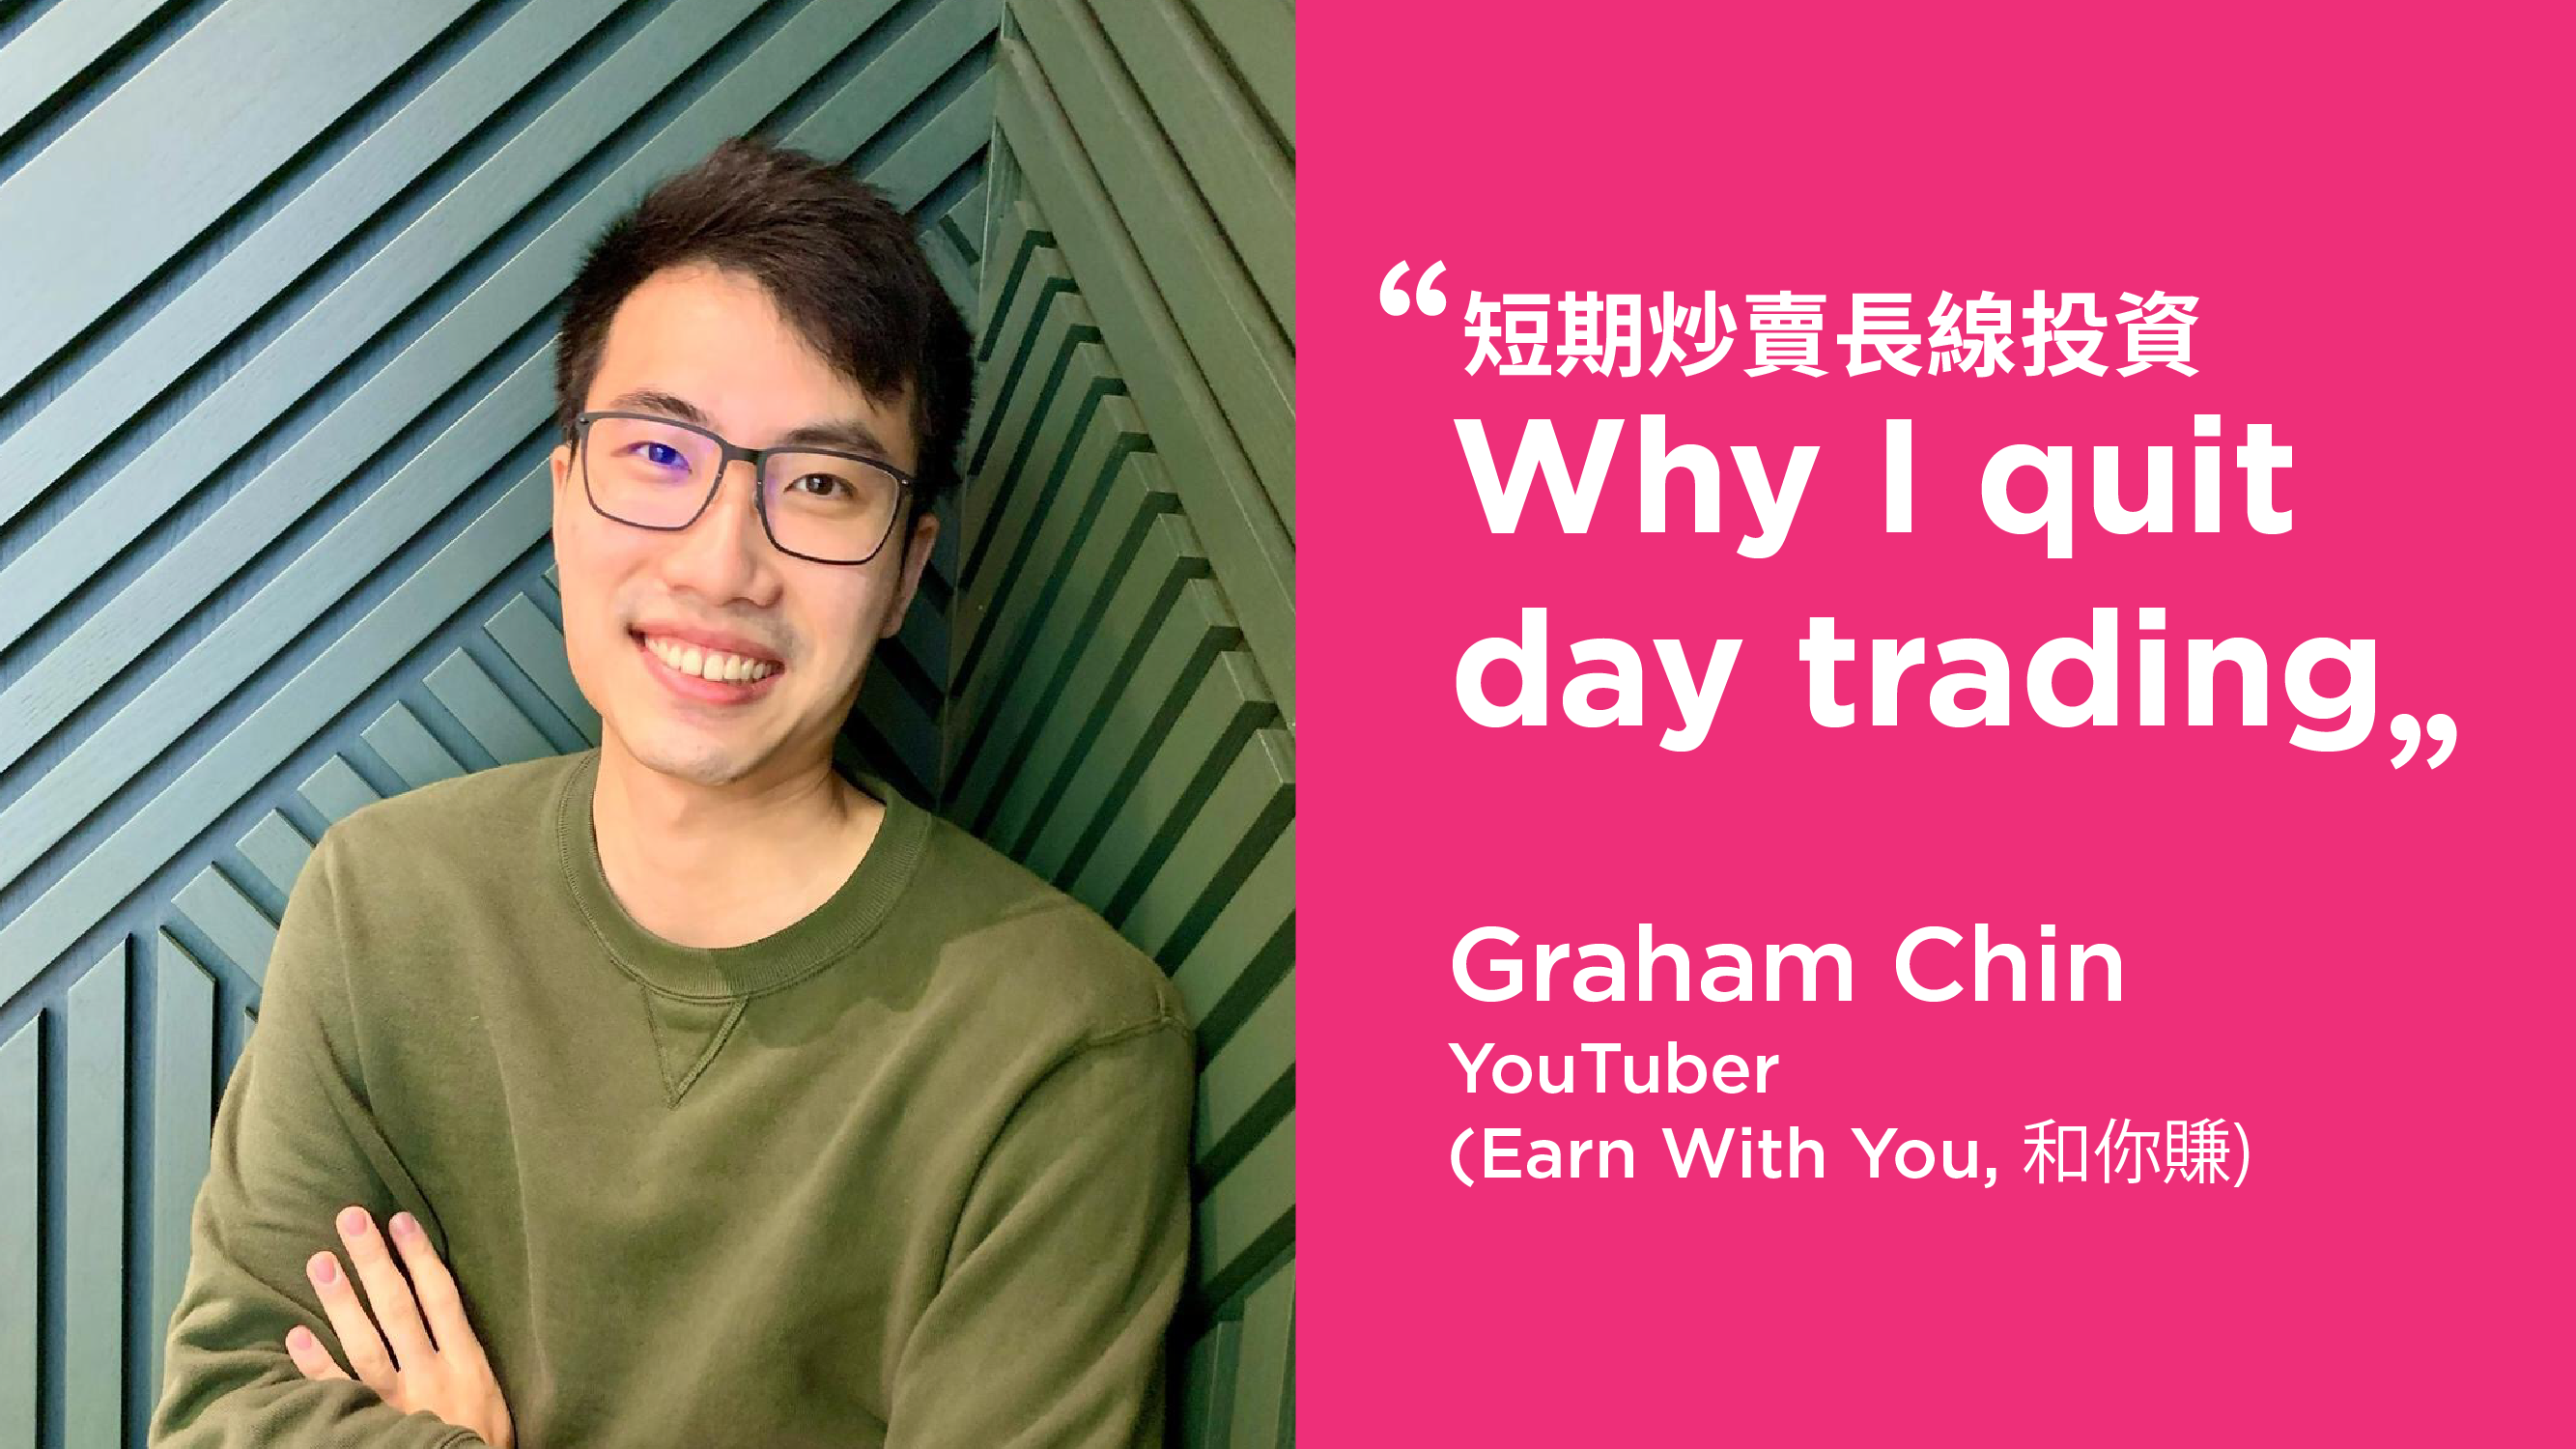 From Hectic Day-Trader to Long-Term Investor: Youtuber Graham